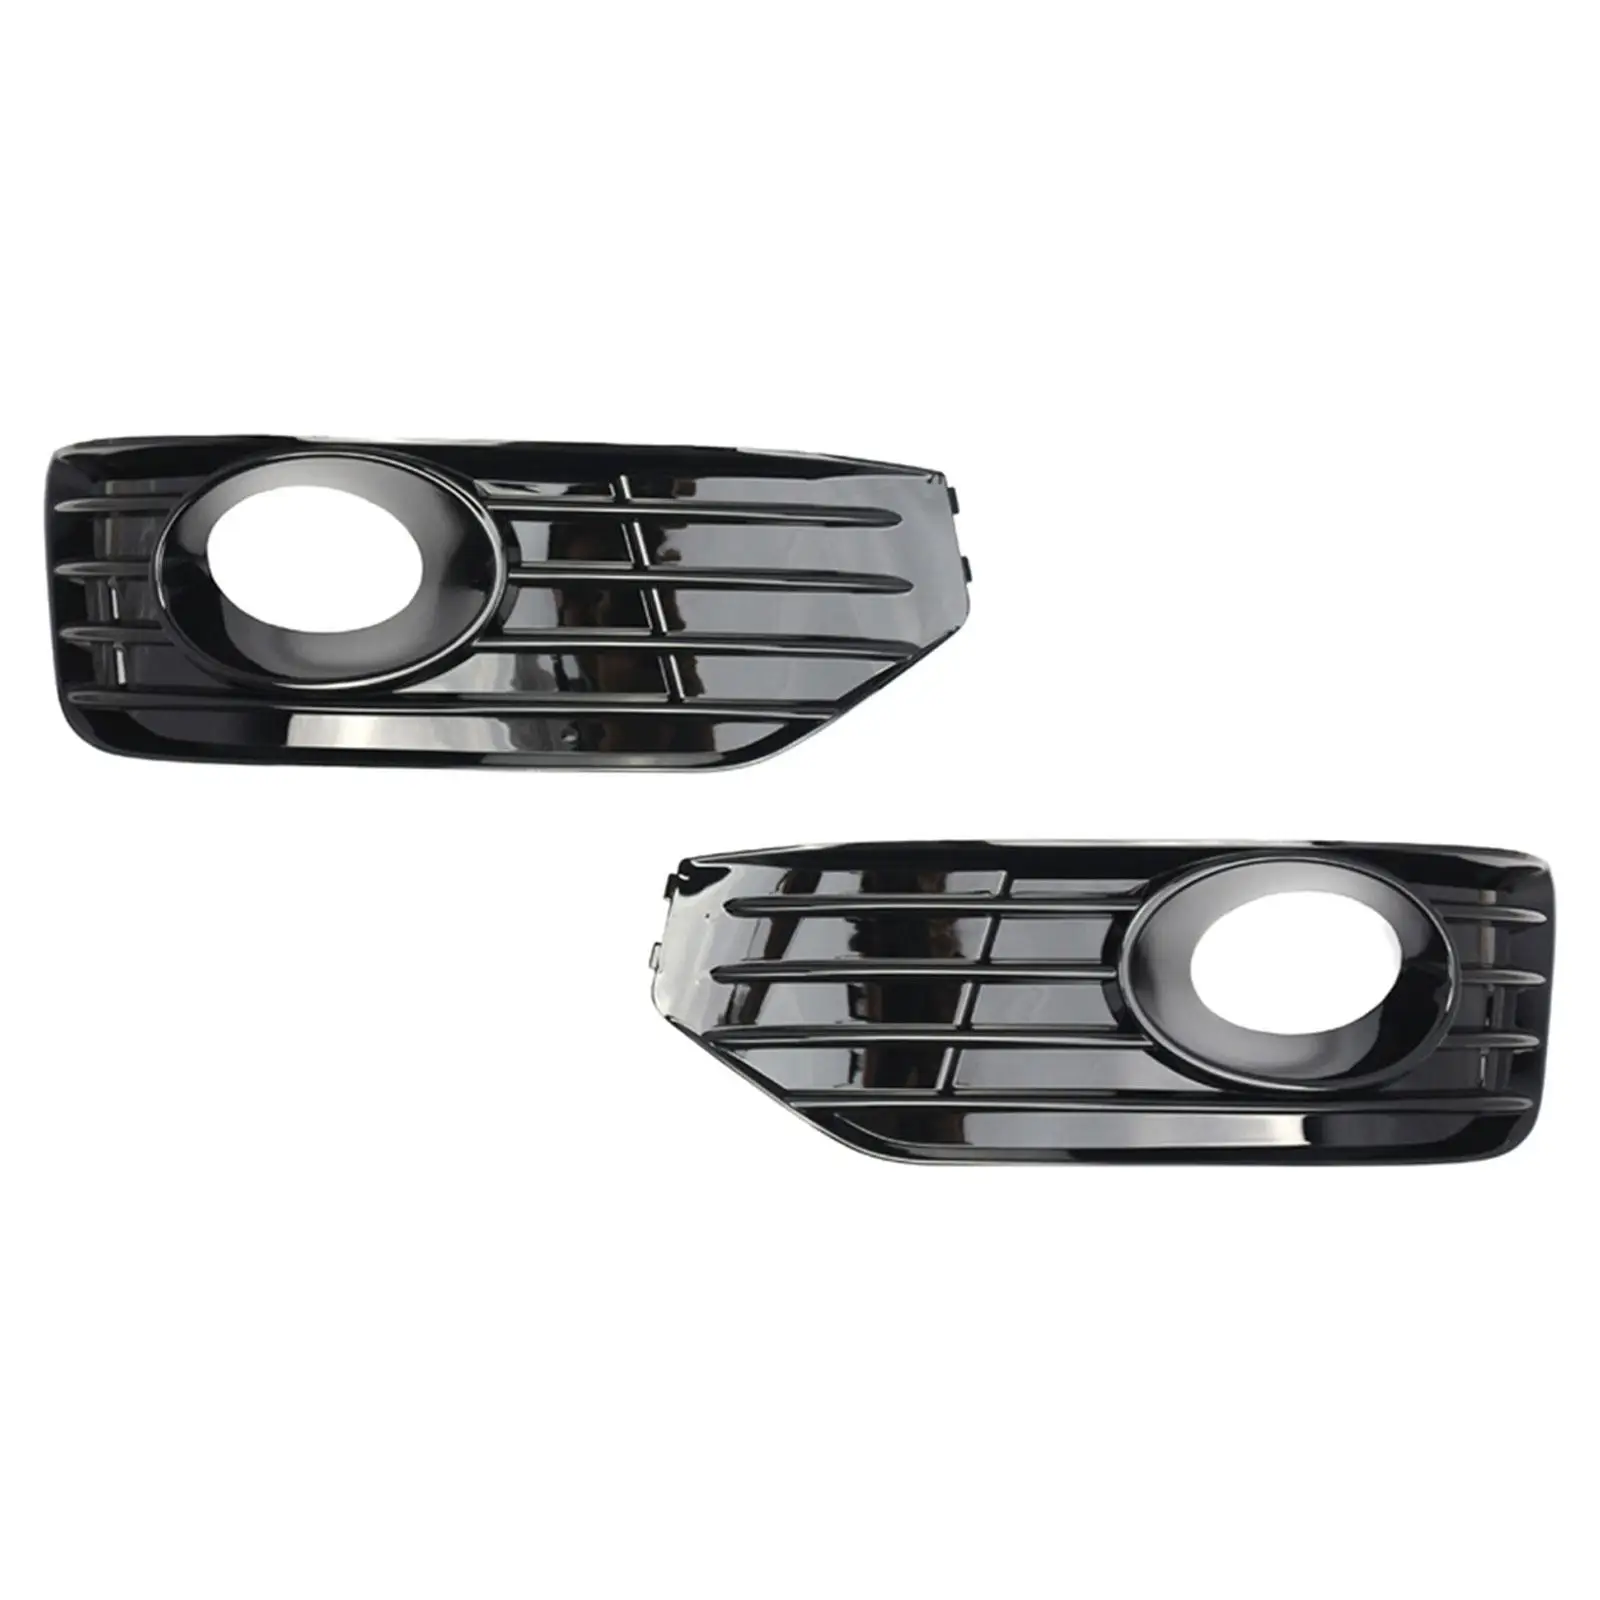 2x Fog Light Grille Covers Easy Installation Spare Parts Professional Replaces Fog Lamp Cover Insert for VW T5.1 Sportline